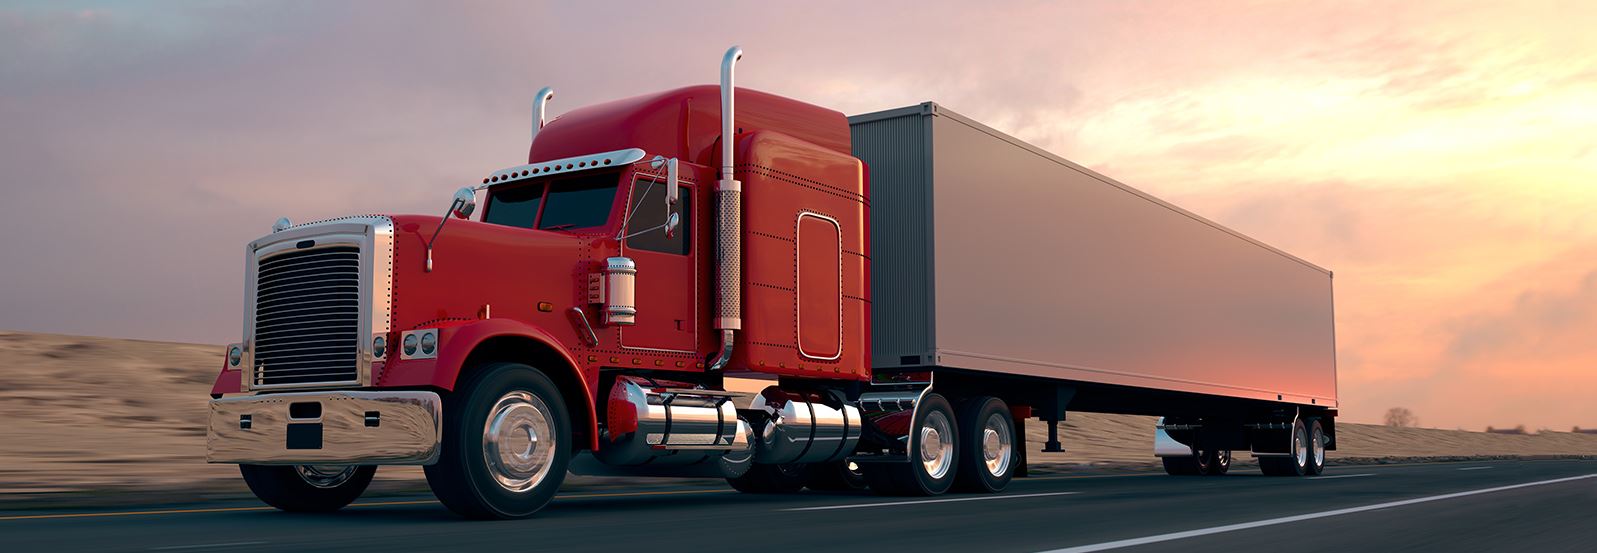 Planning Efficient travel Routes, saving Time and Fuel for Making the most of your Truck Fleet